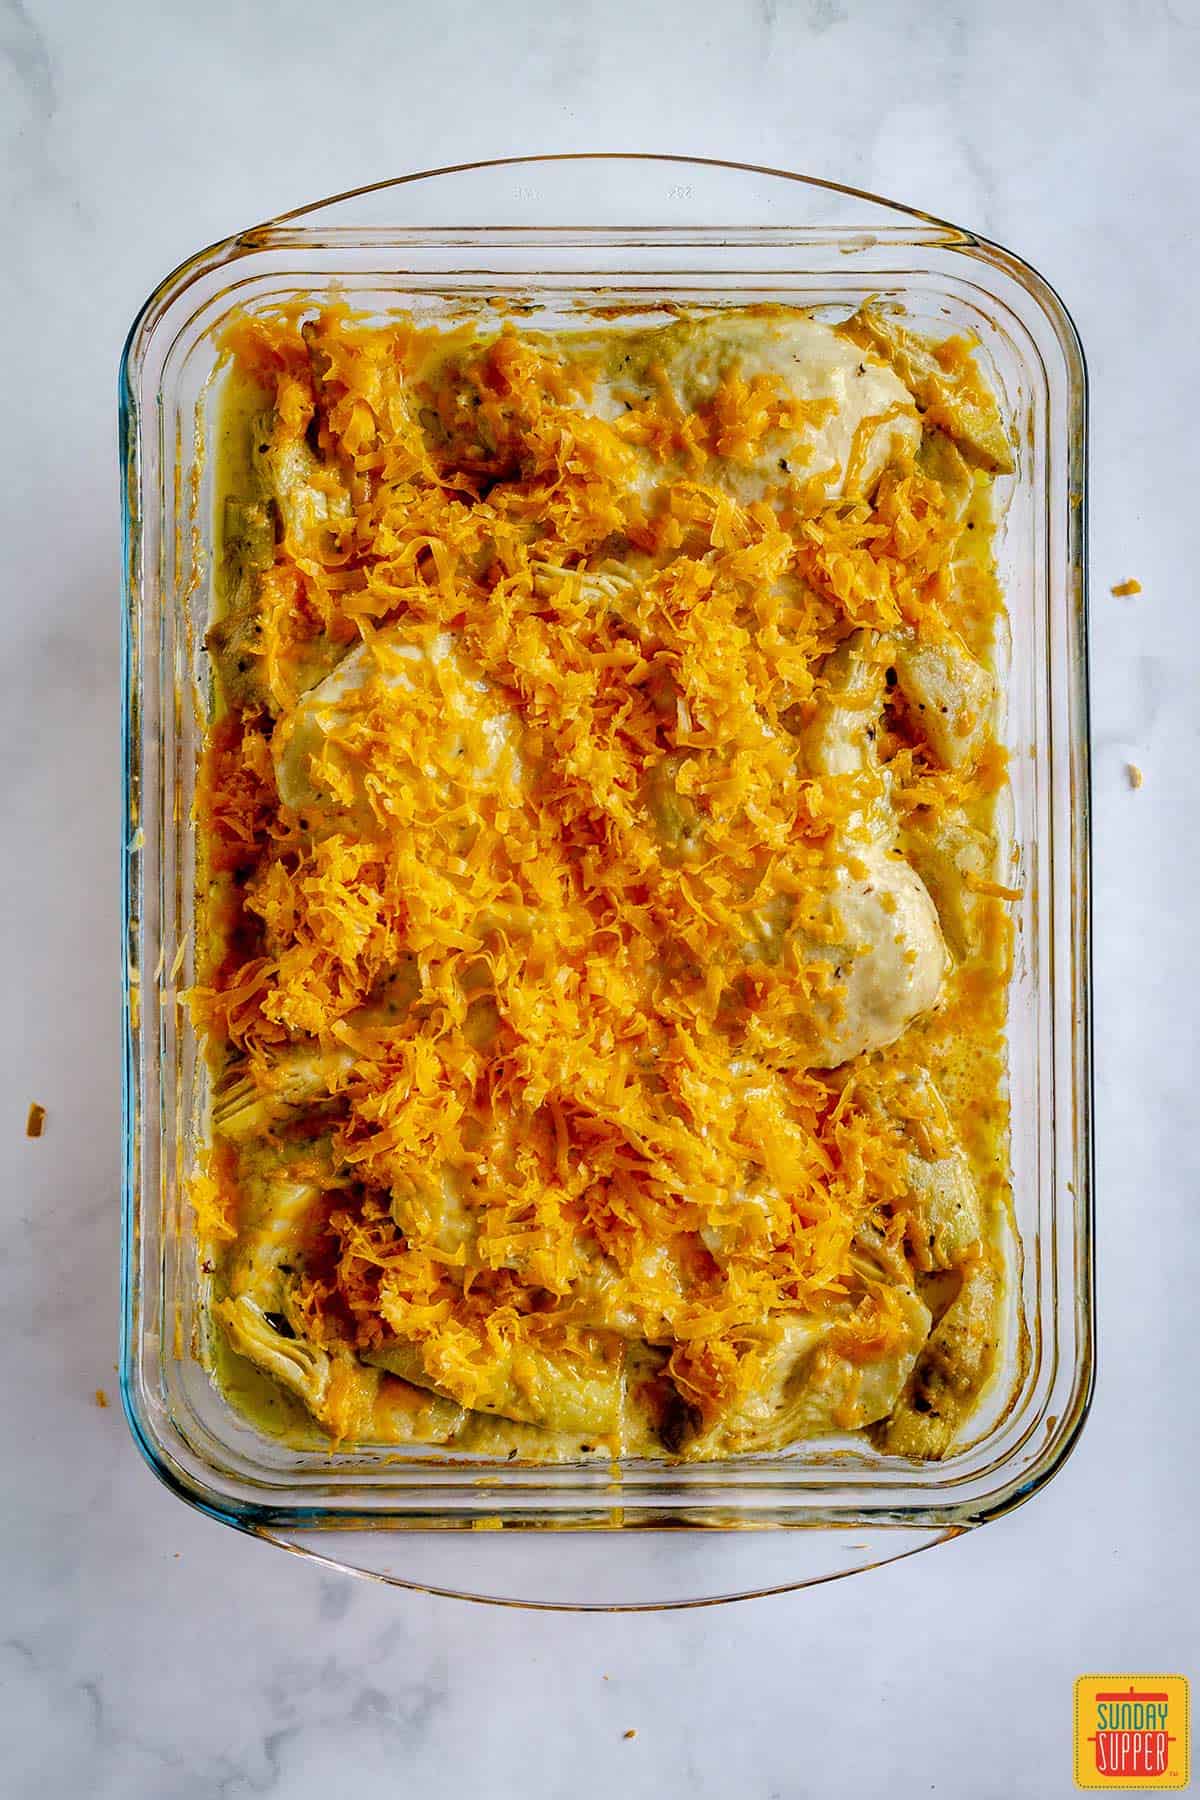 Chicken sprinkled with cheese in baking dish